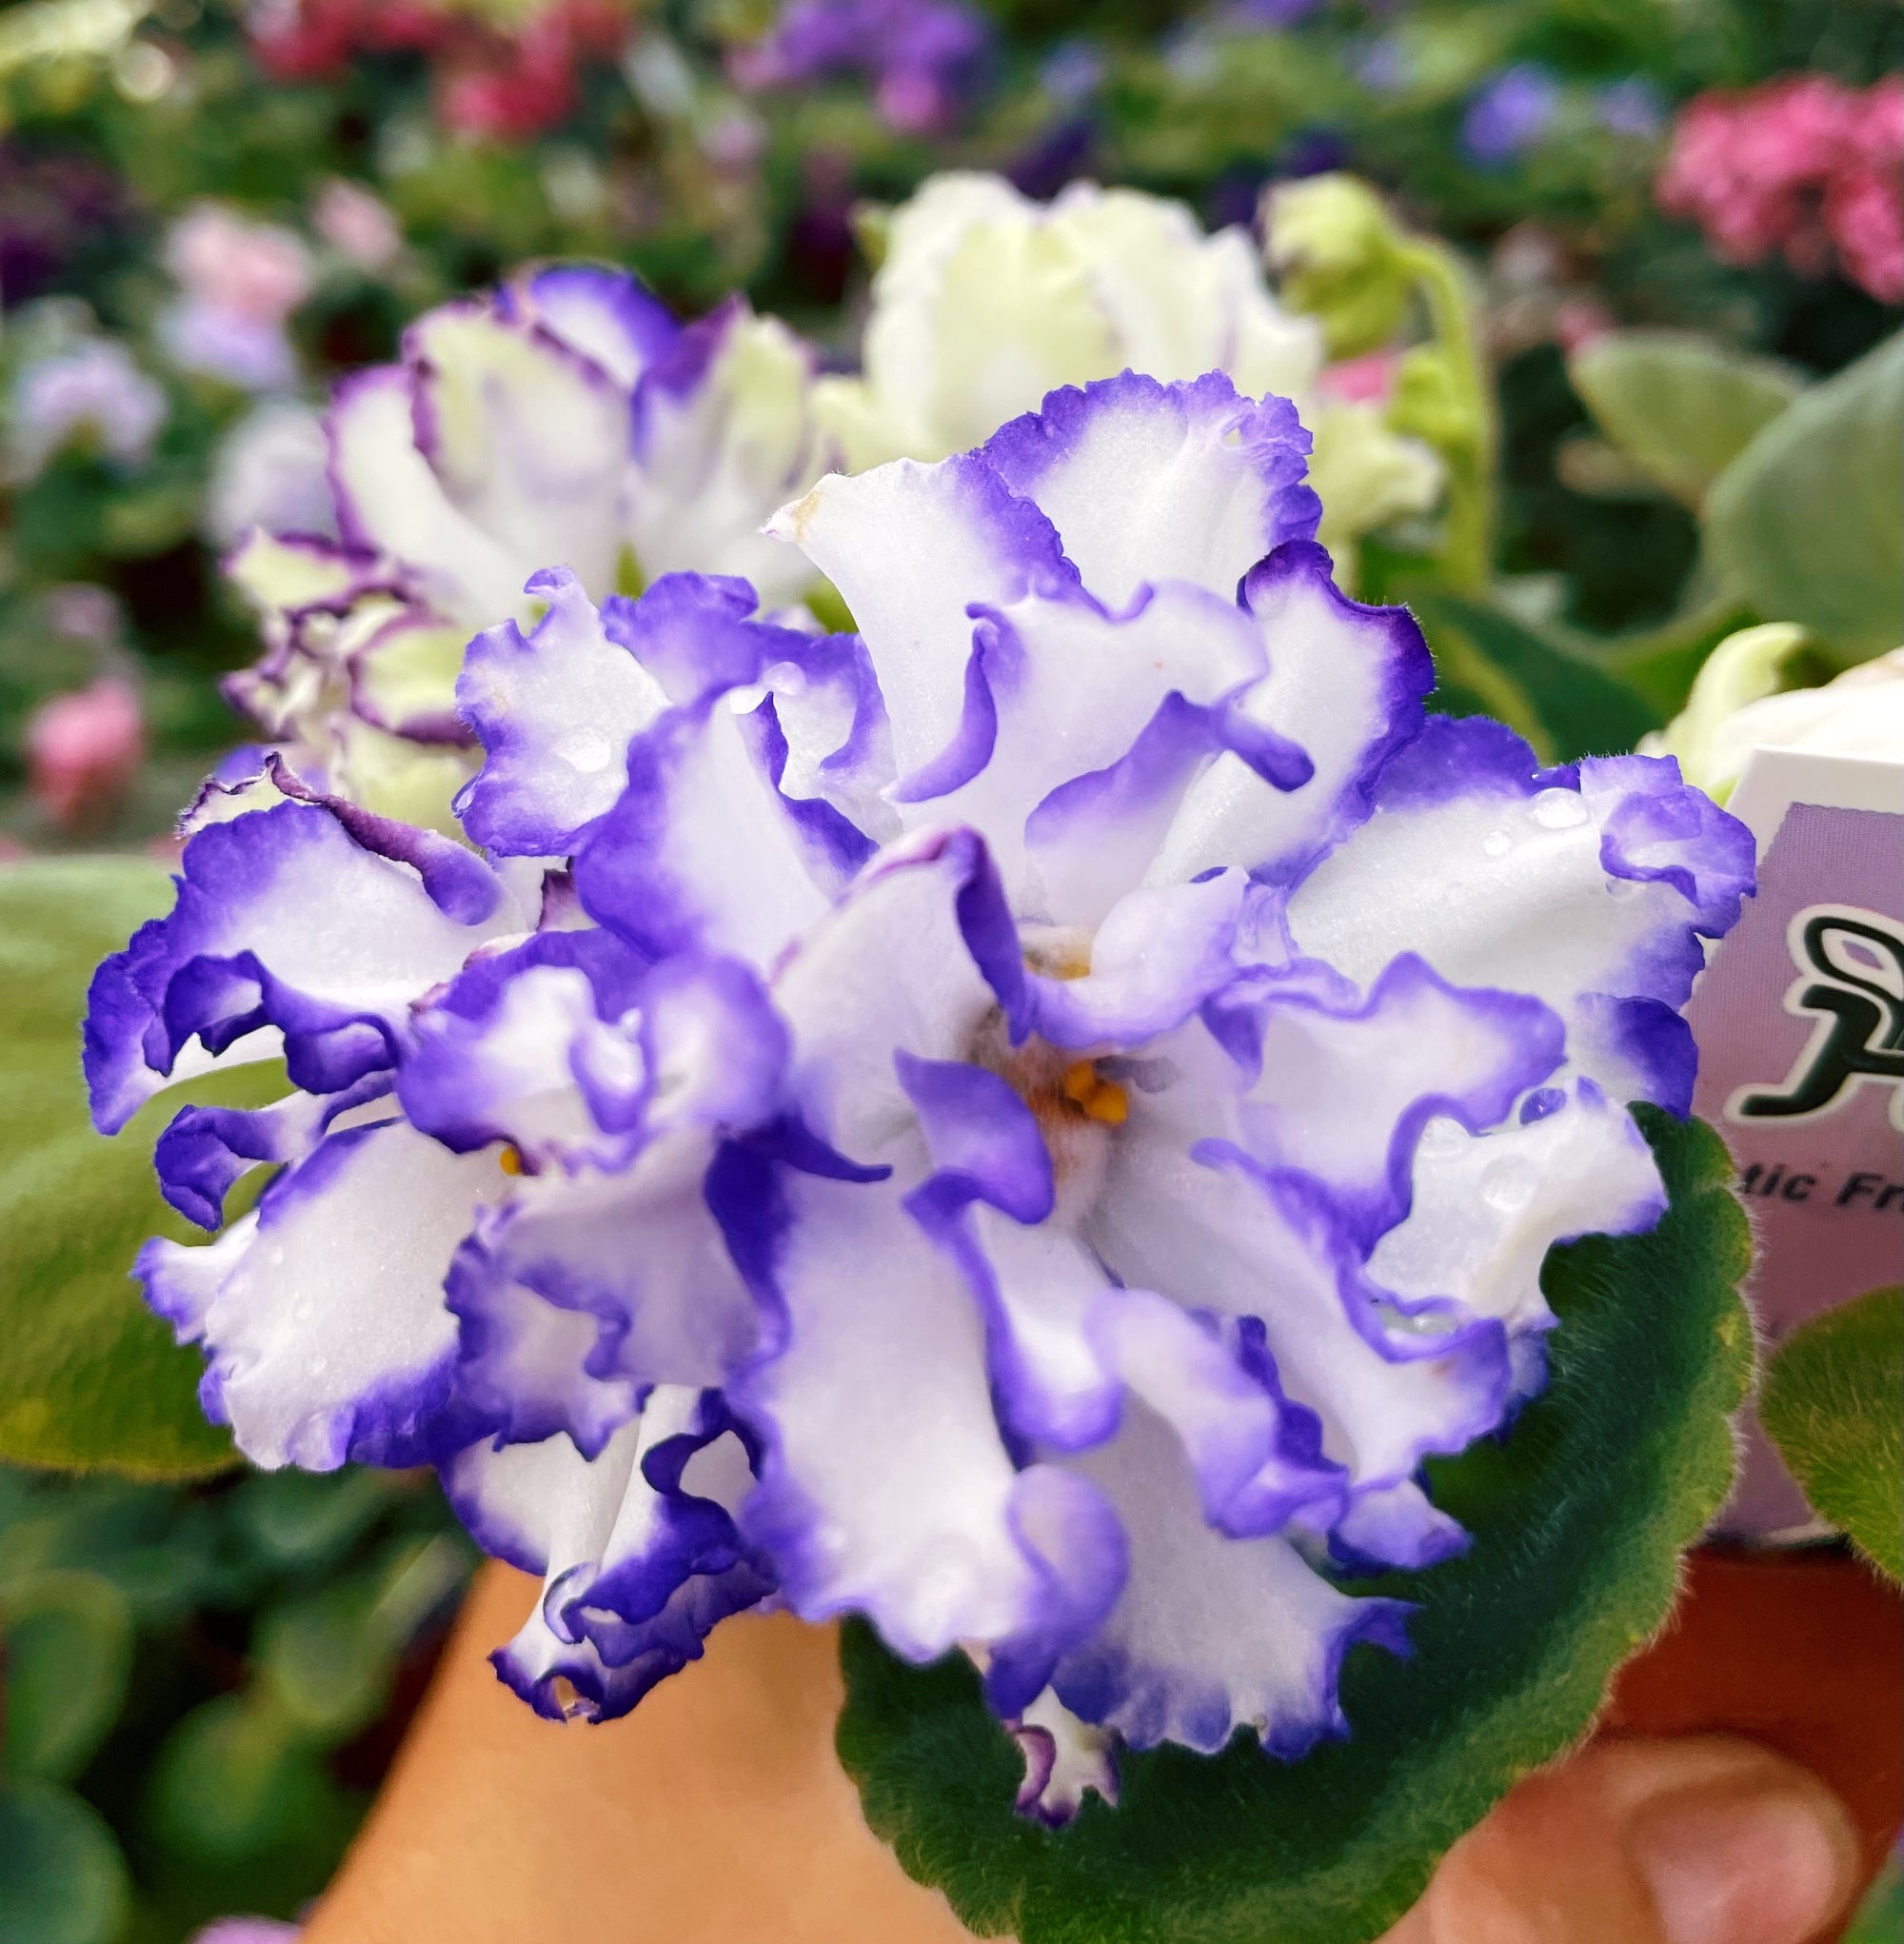 Live house plant variegated chimera bloom African Violet ‘Arctic Frost’ garden 4” flower Potted gift